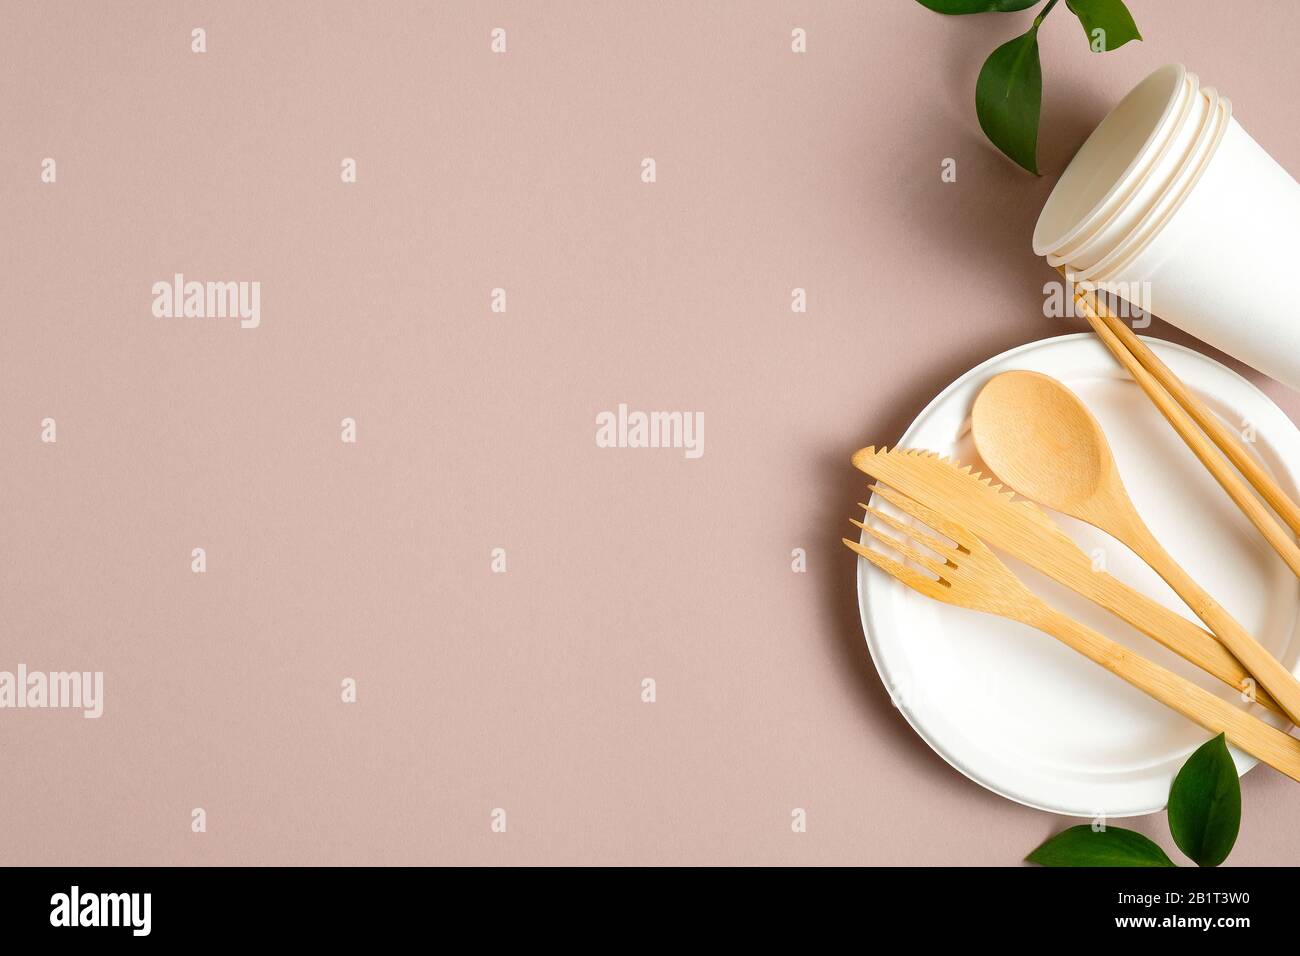 Eco-friendly wooden cutlery set, paper cups and plate with green leaves on brown background. Zero waste, plastic free concept. Sustainable lifestyle. Stock Photo